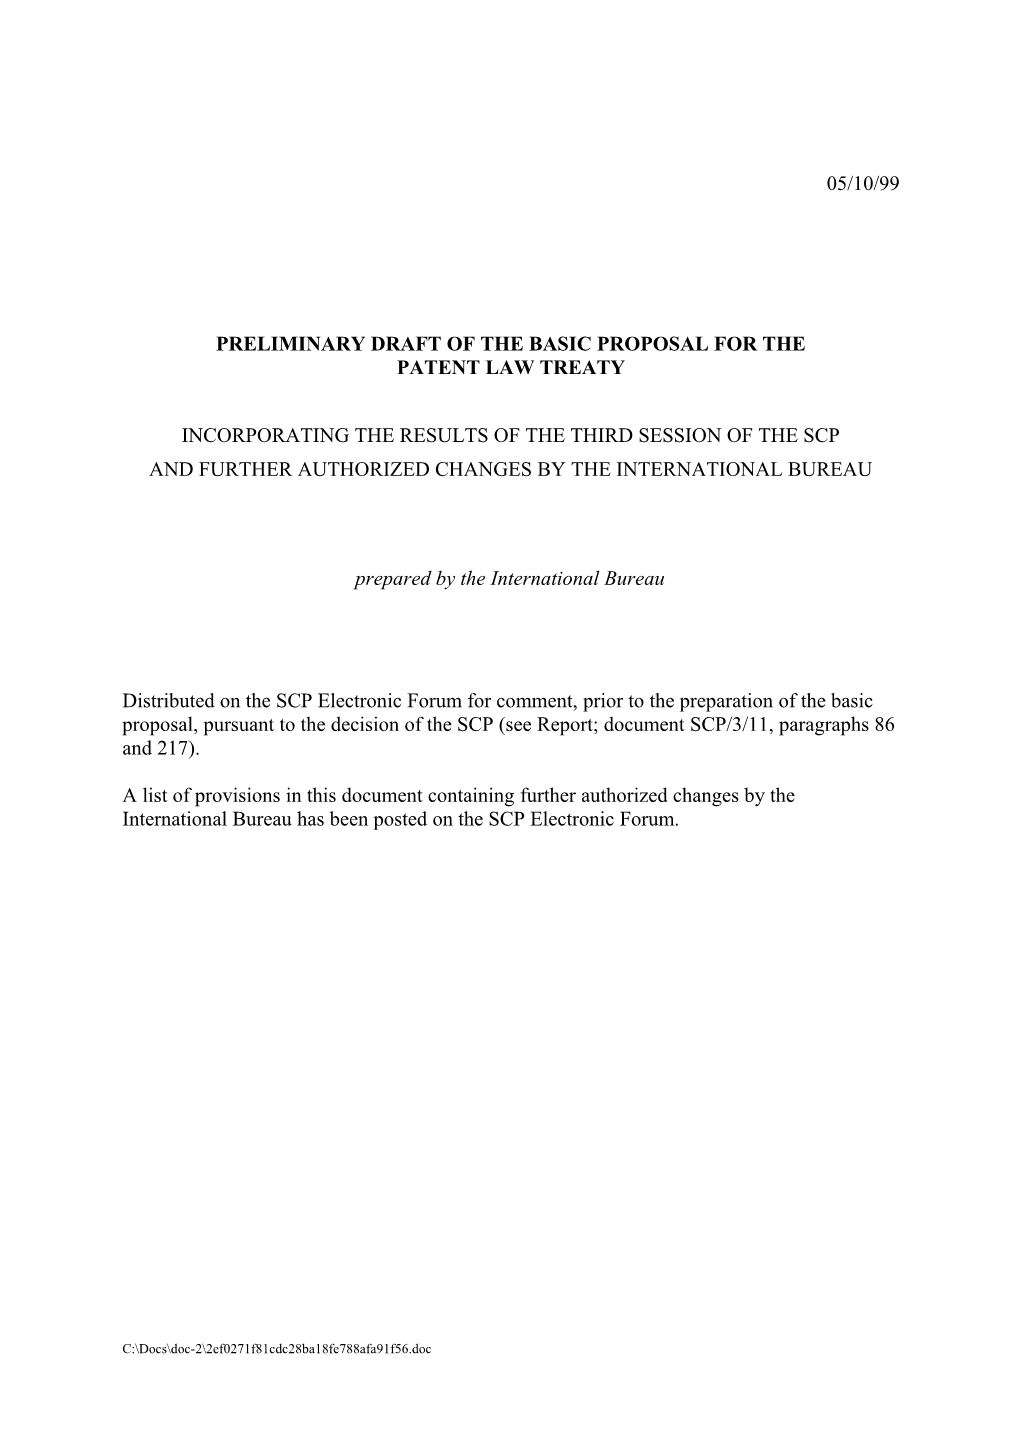 PT/DC/3: Basic Proposal for the Patent Law Treaty